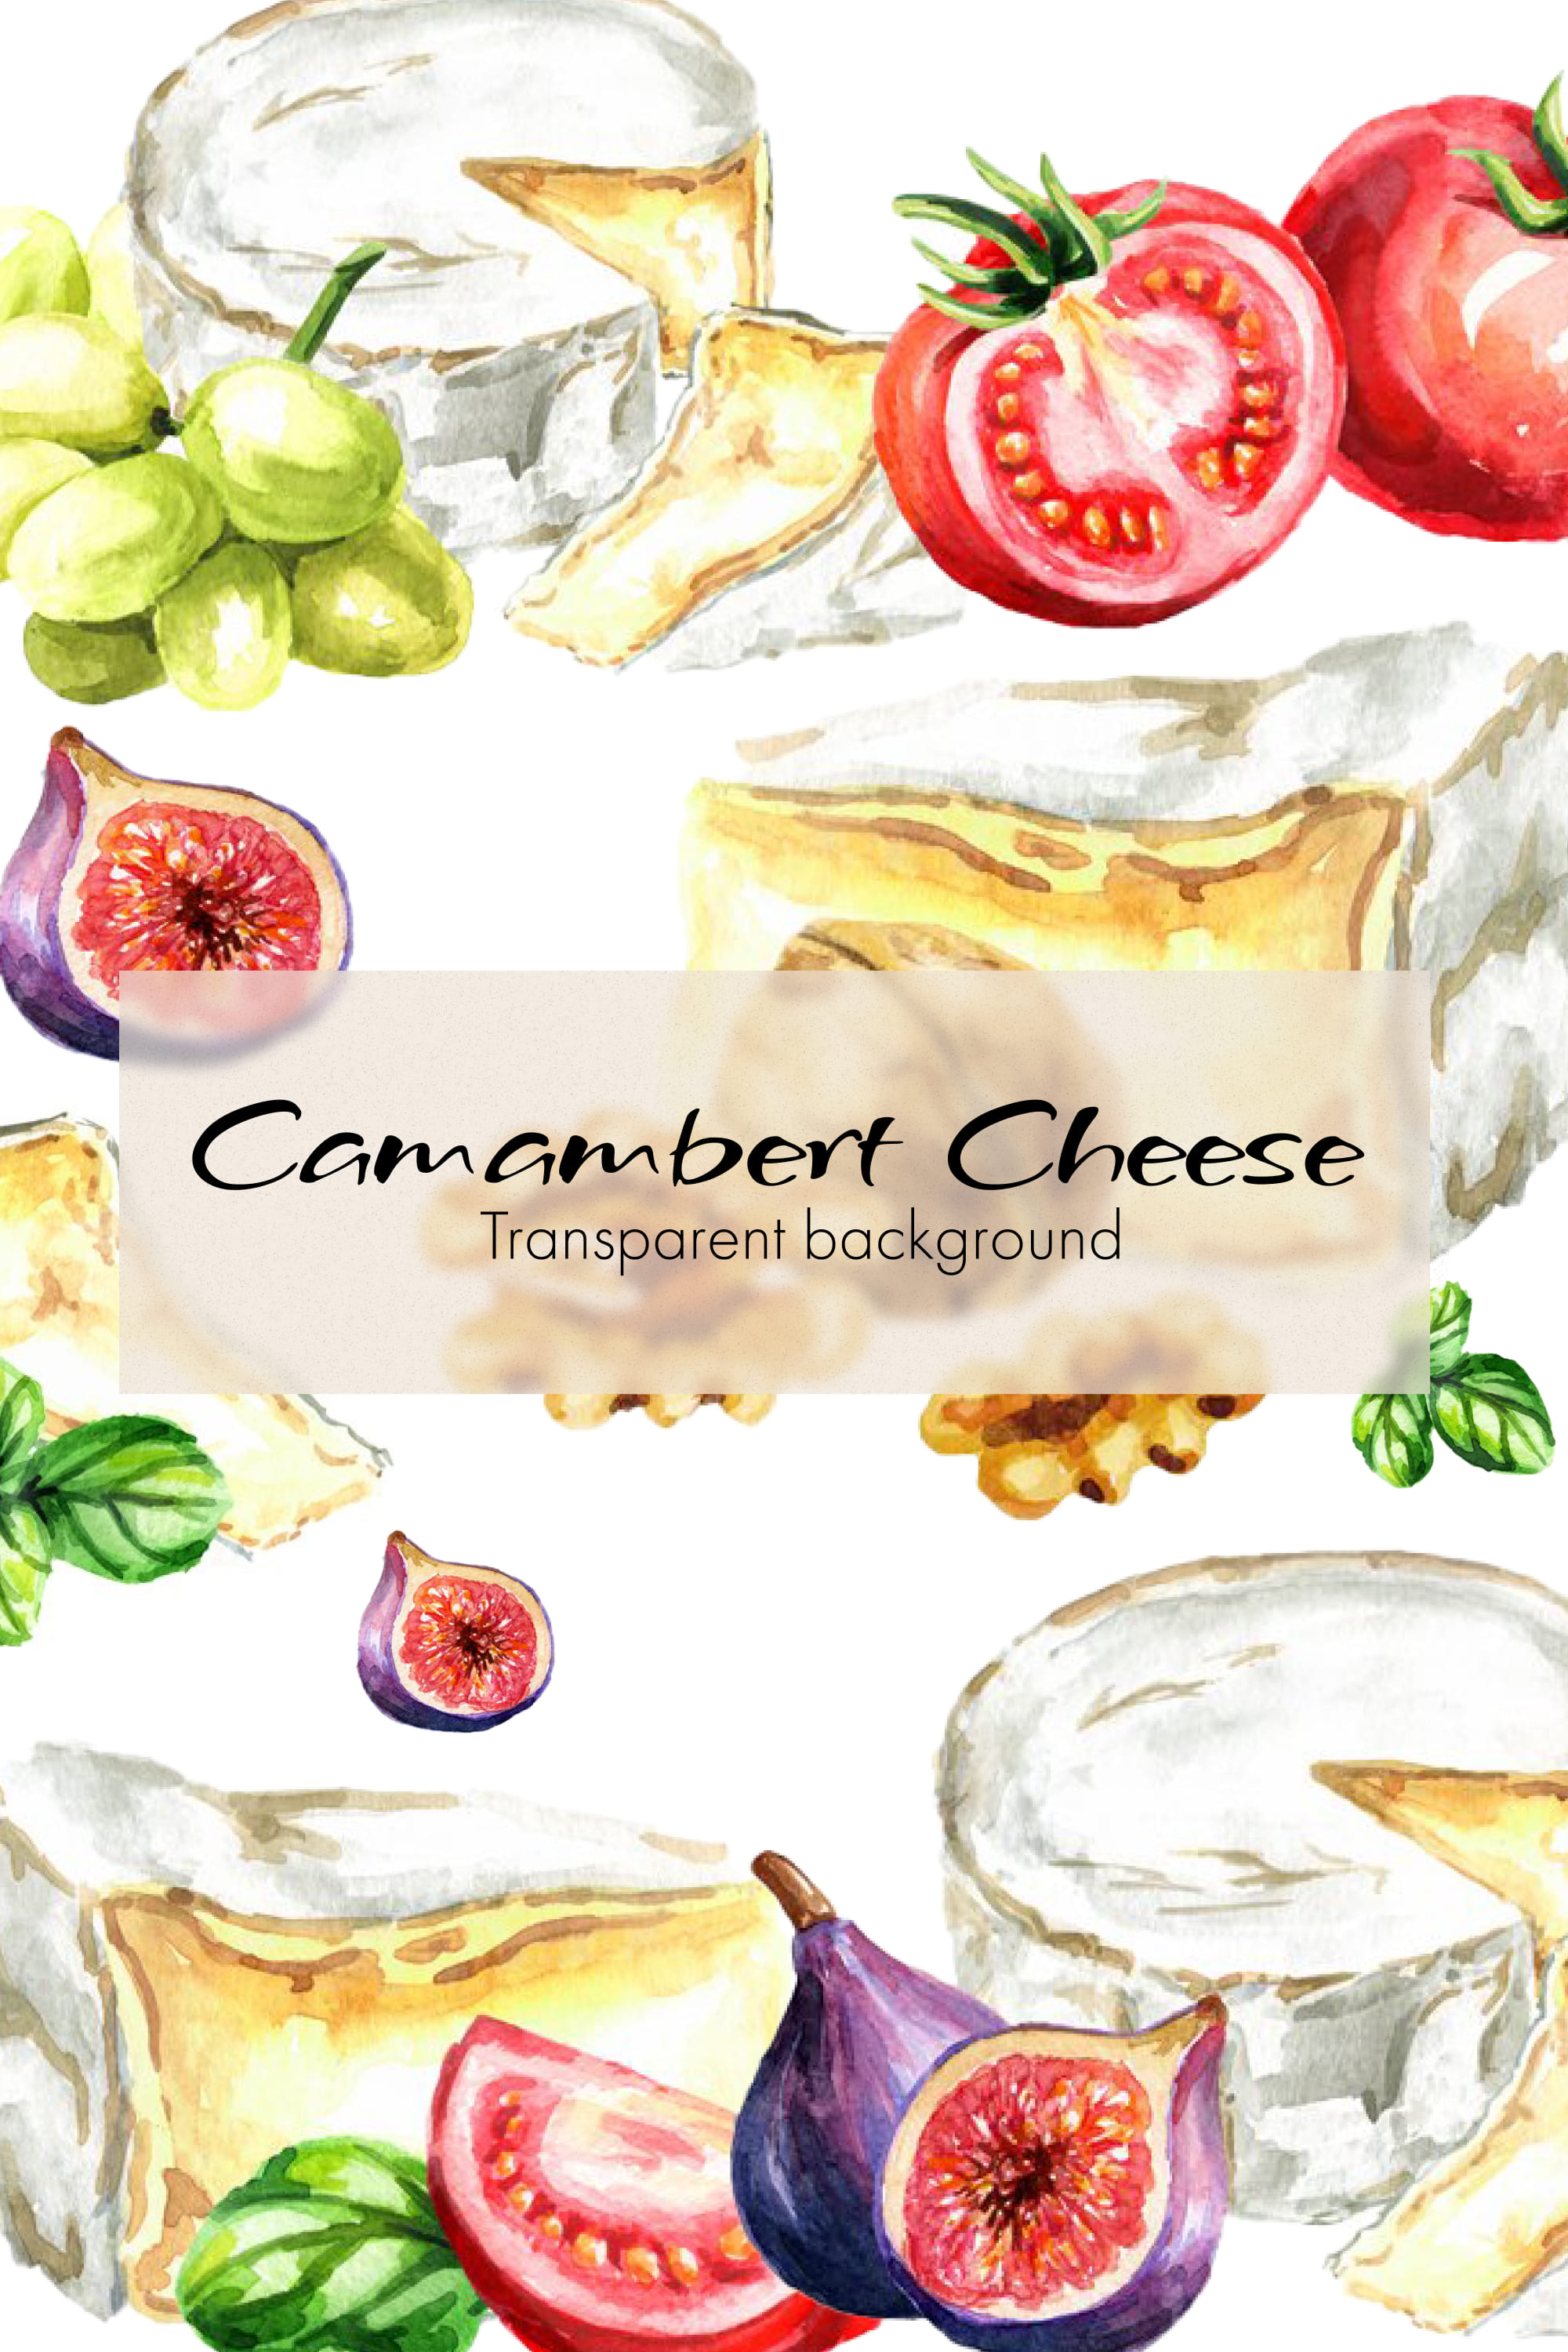 Set of images of camembert cheese and tomatoes and grapes.